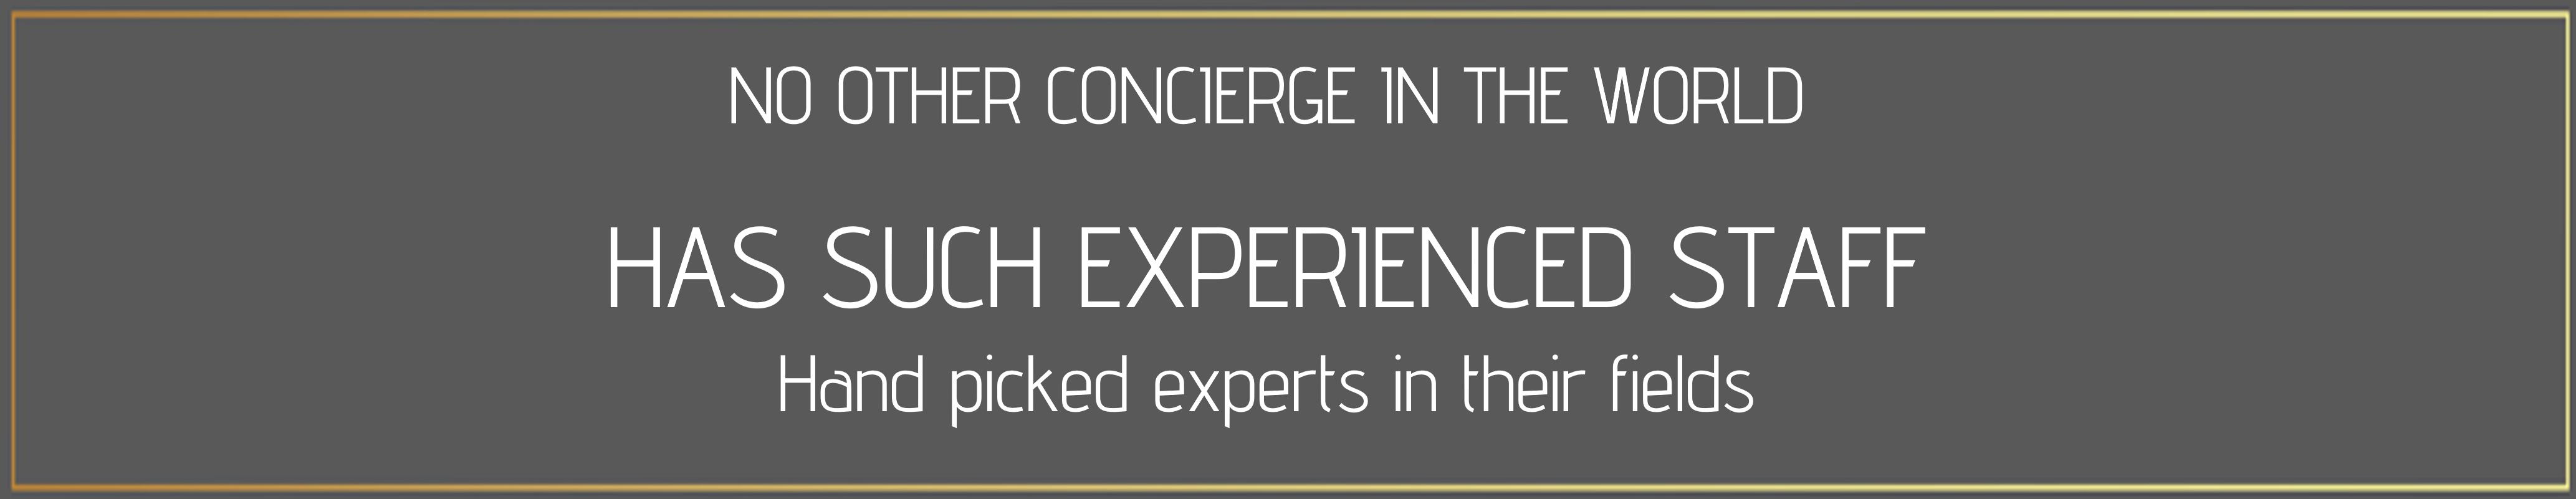 sincura concierge has the most experience staff for all your lifestyle needs